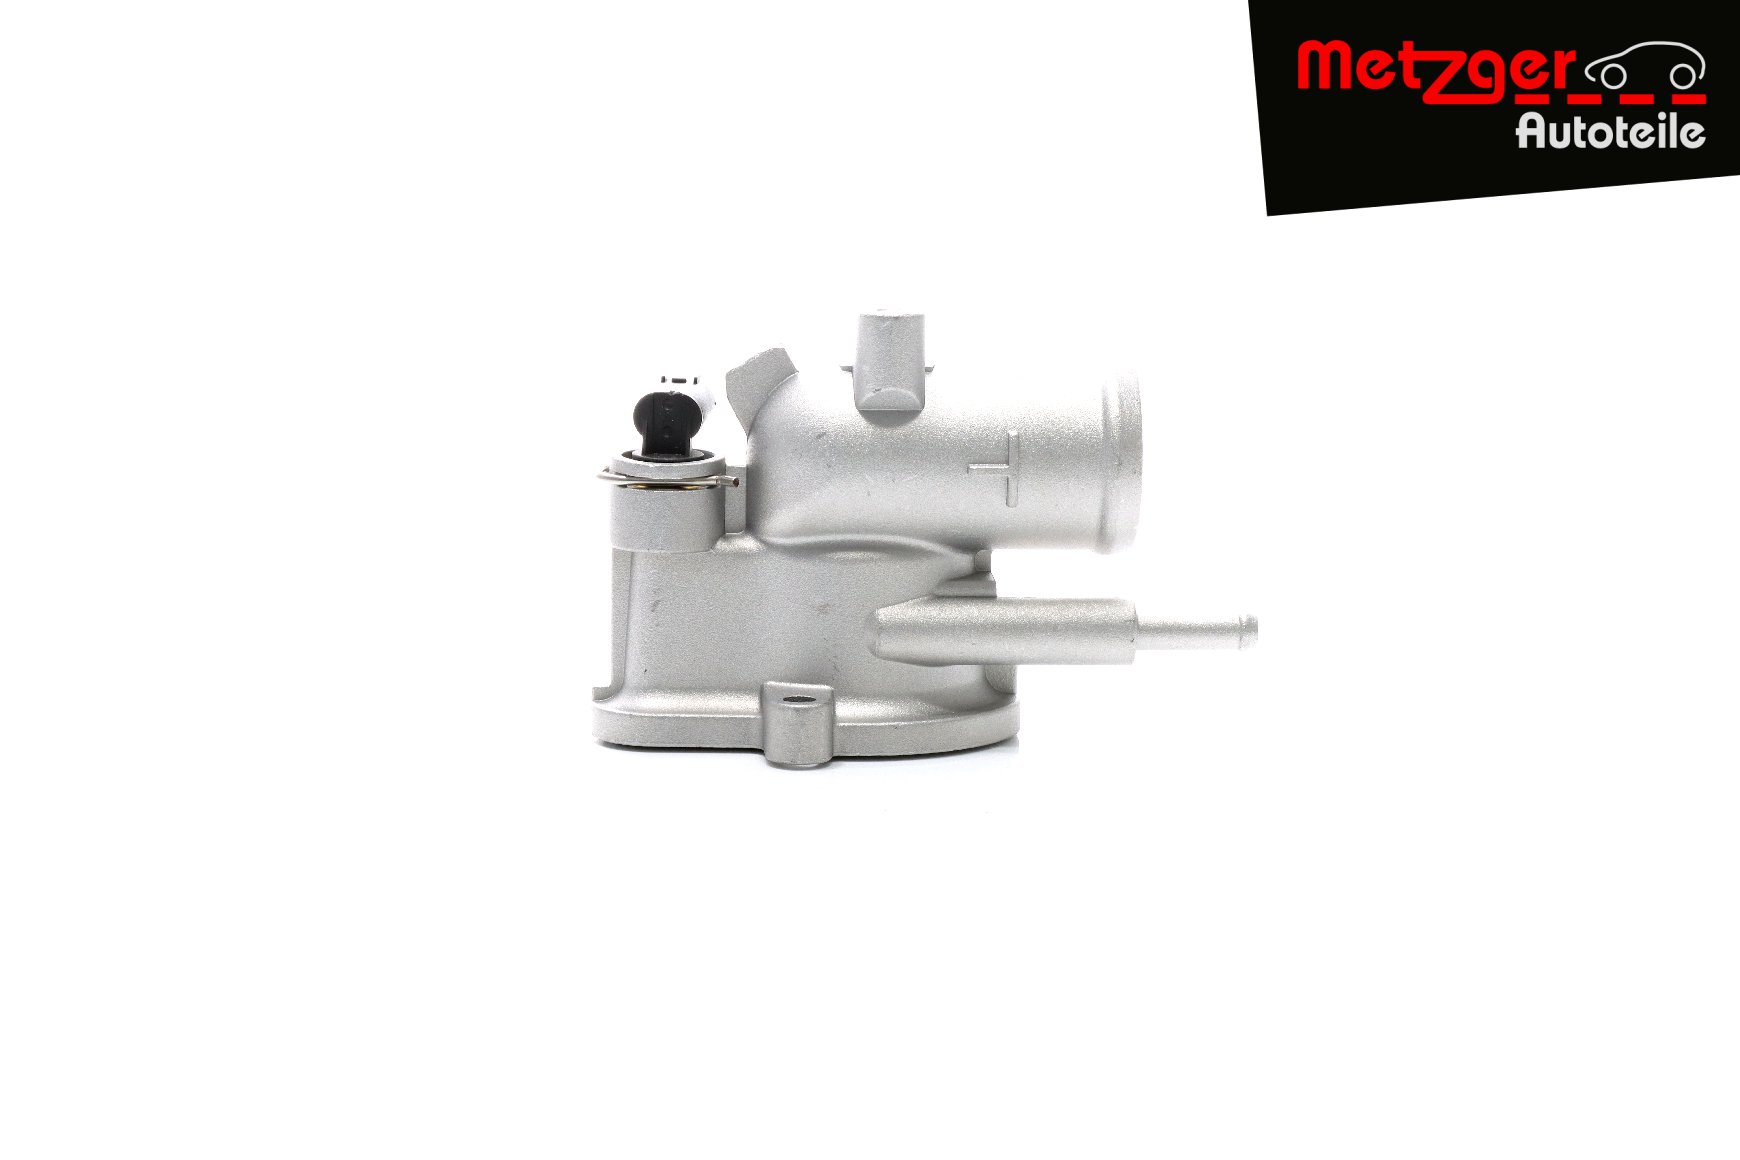 Mercedes VITO Coolant thermostat 9693283 METZGER 4006070 online buy